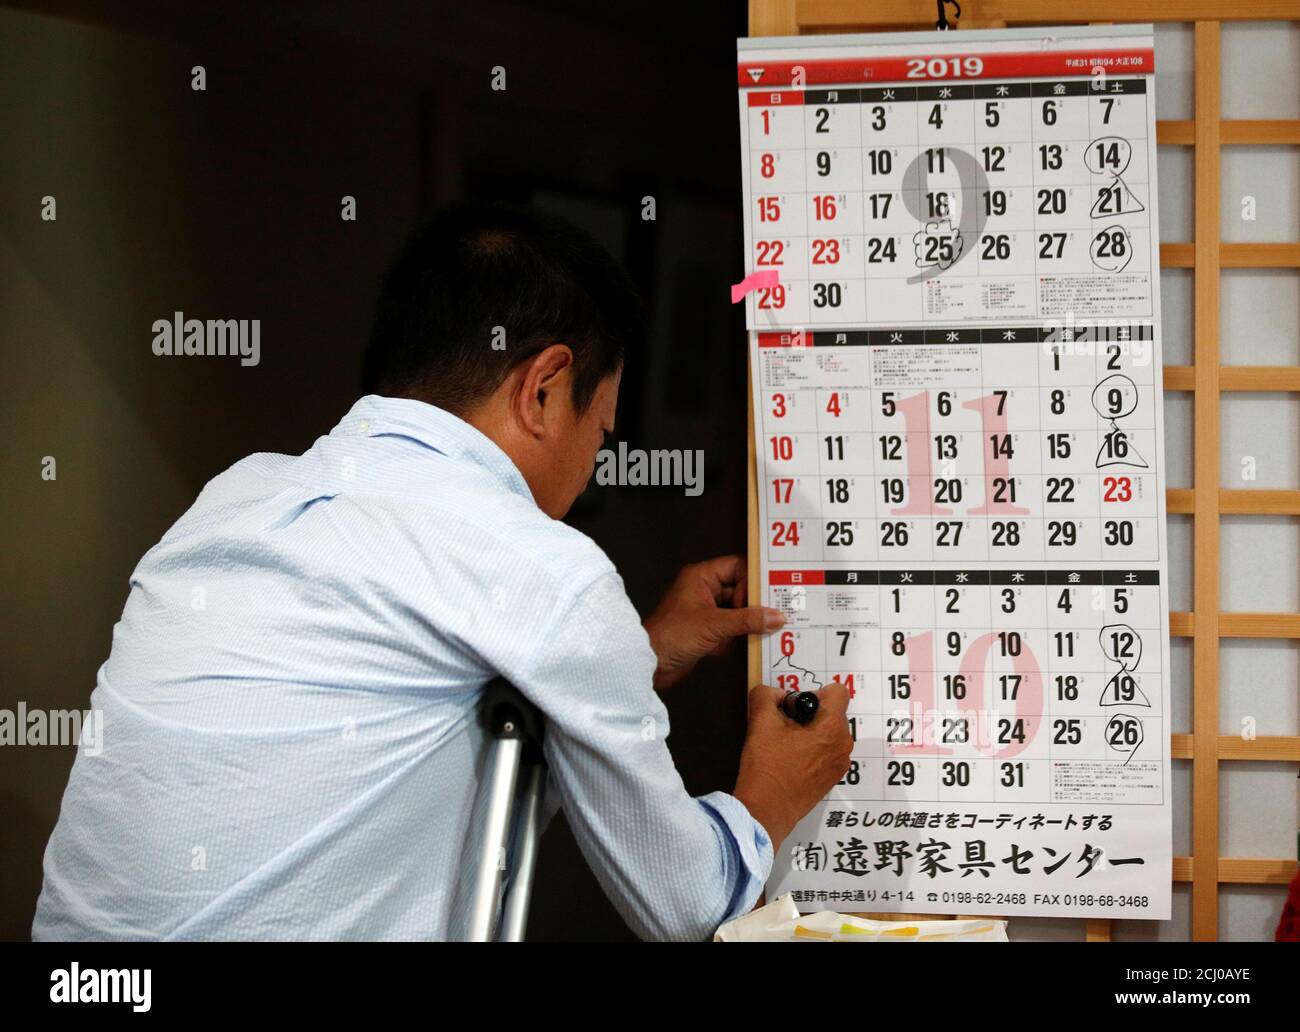 Masaaki Kimura, 63, circles the dates of the Rugby World Cup matches that he will attend at Kamaishi Recovery Memorial Stadium in Unosumai, Japan September 24, 2019. Kamaishi stadium was built on the former site of two schools which was destroyed by the 2011 tsunami. Masaaki lost his wife who was a schoolteacher in one of the schools that day.  REUTERS/Edgar Su Stock Photo